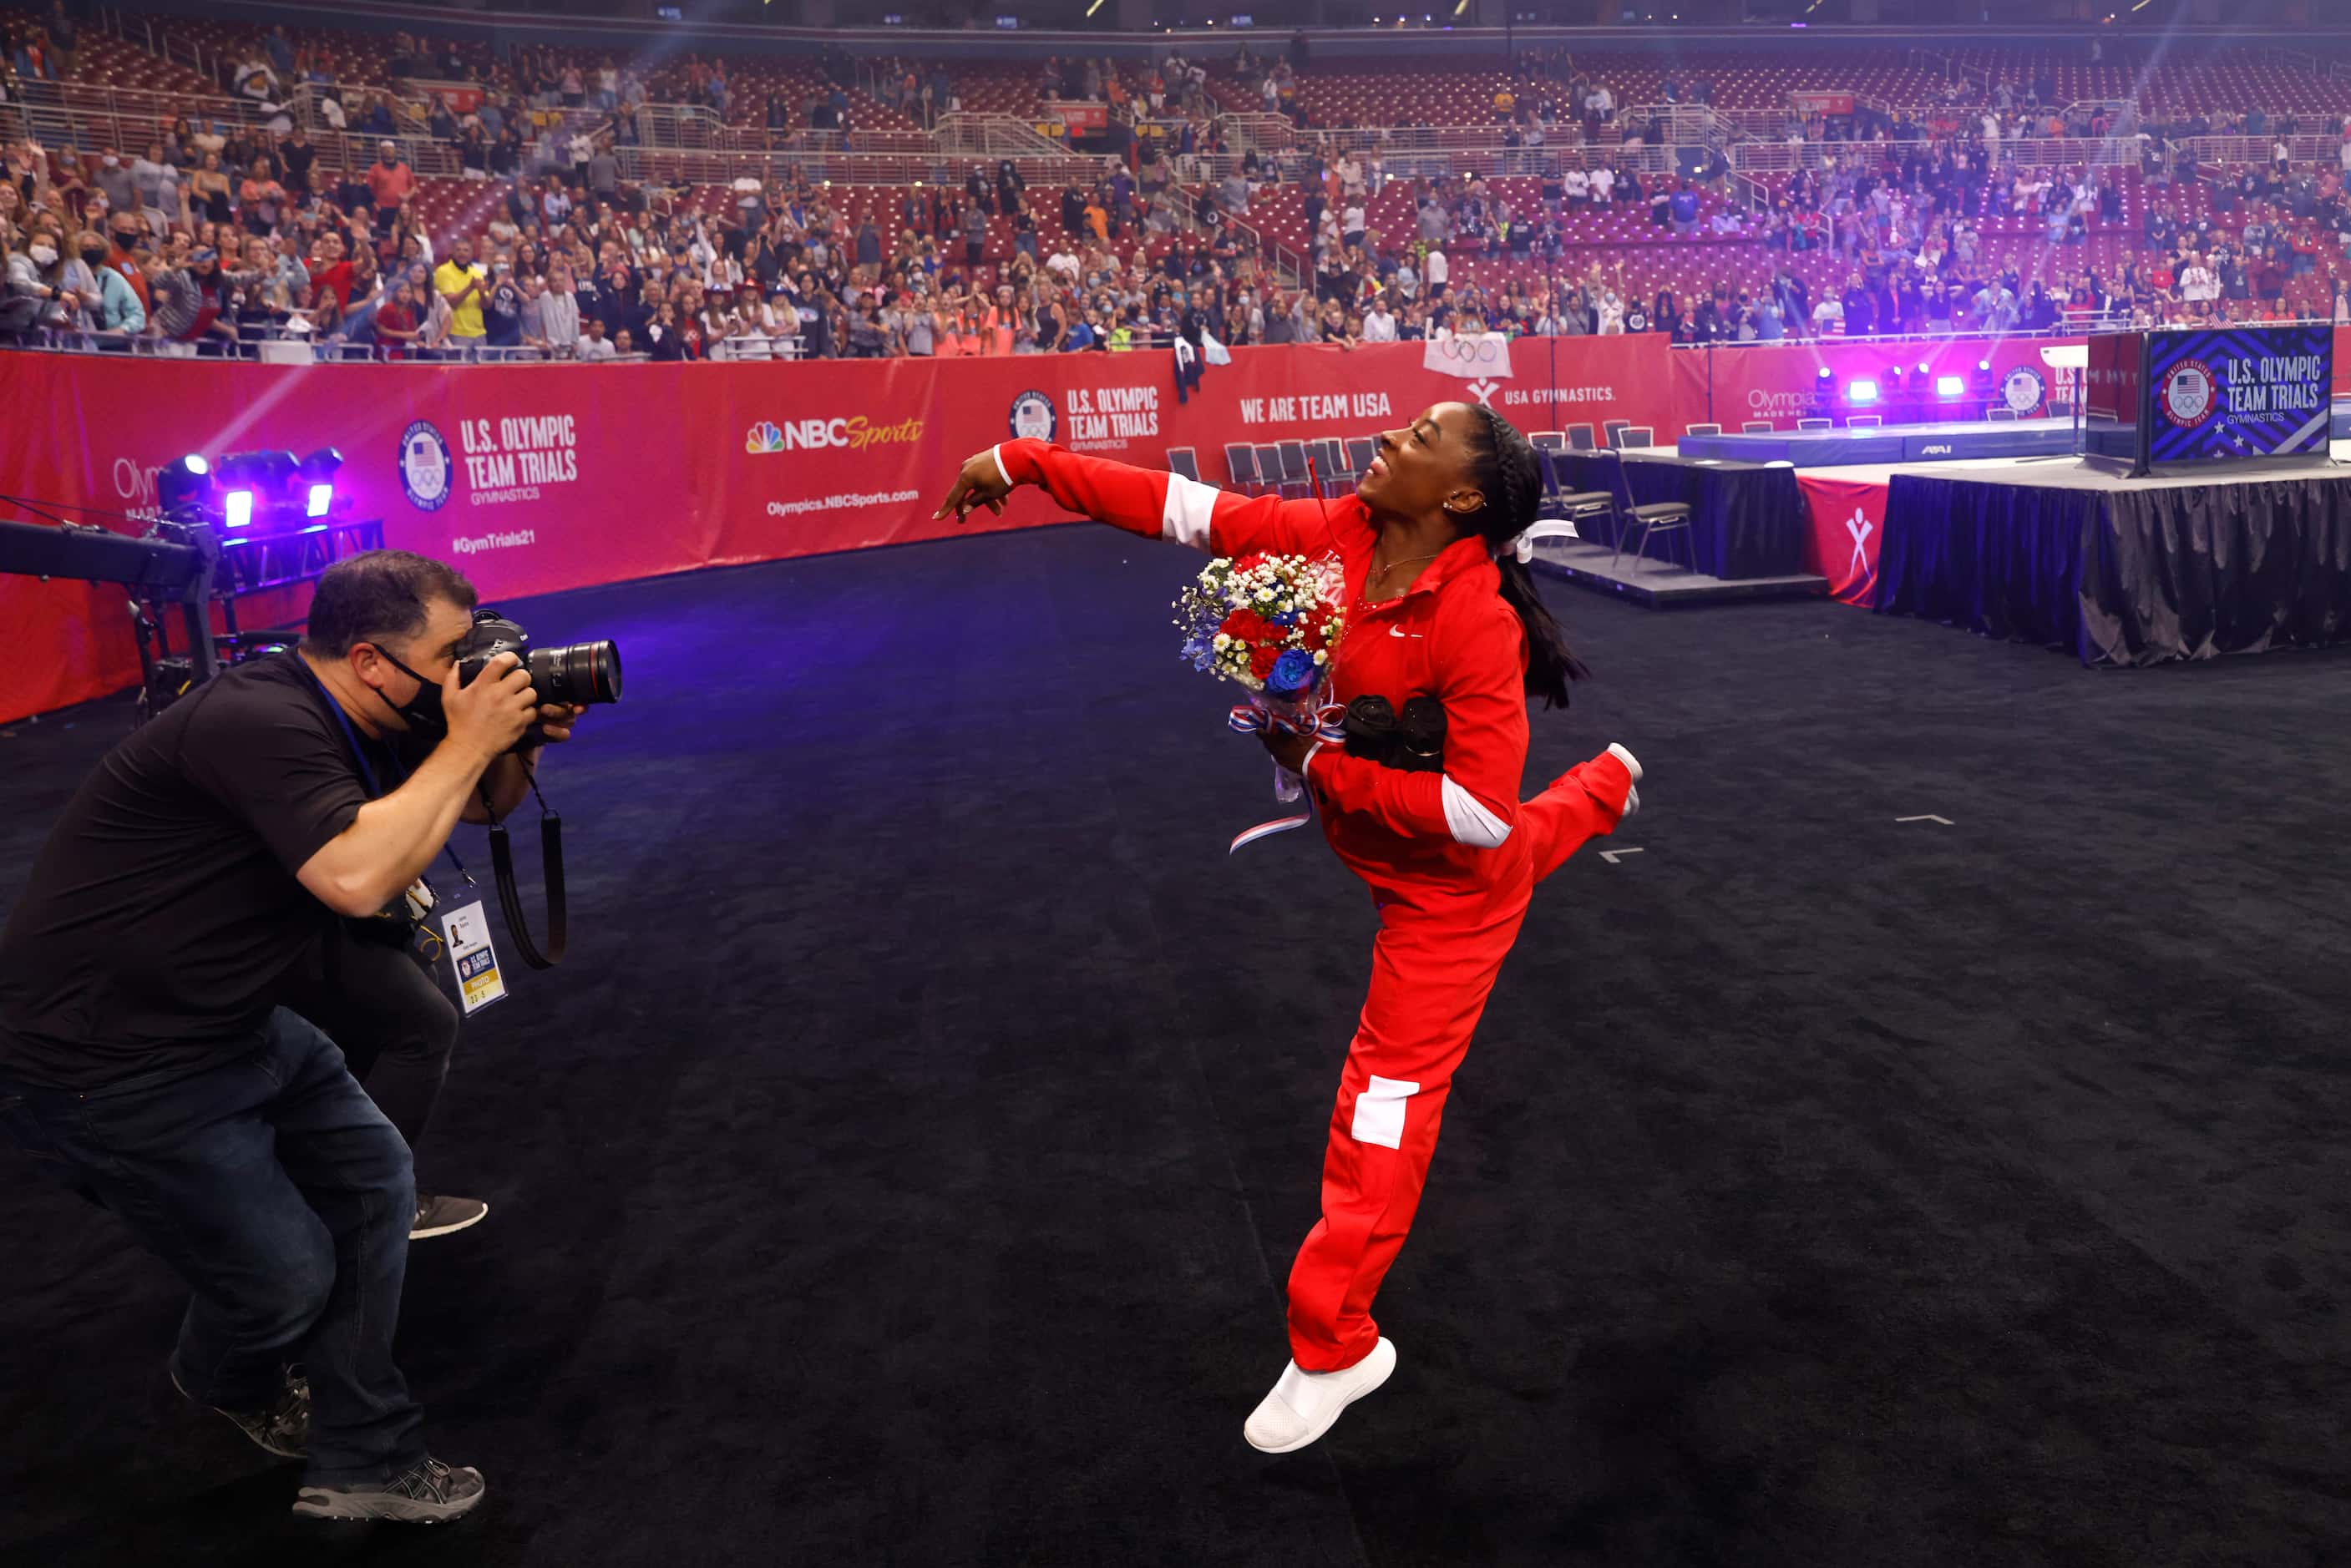 Simone Biles tosses a shirt in the stands after team introductions on day 2 of the women's...